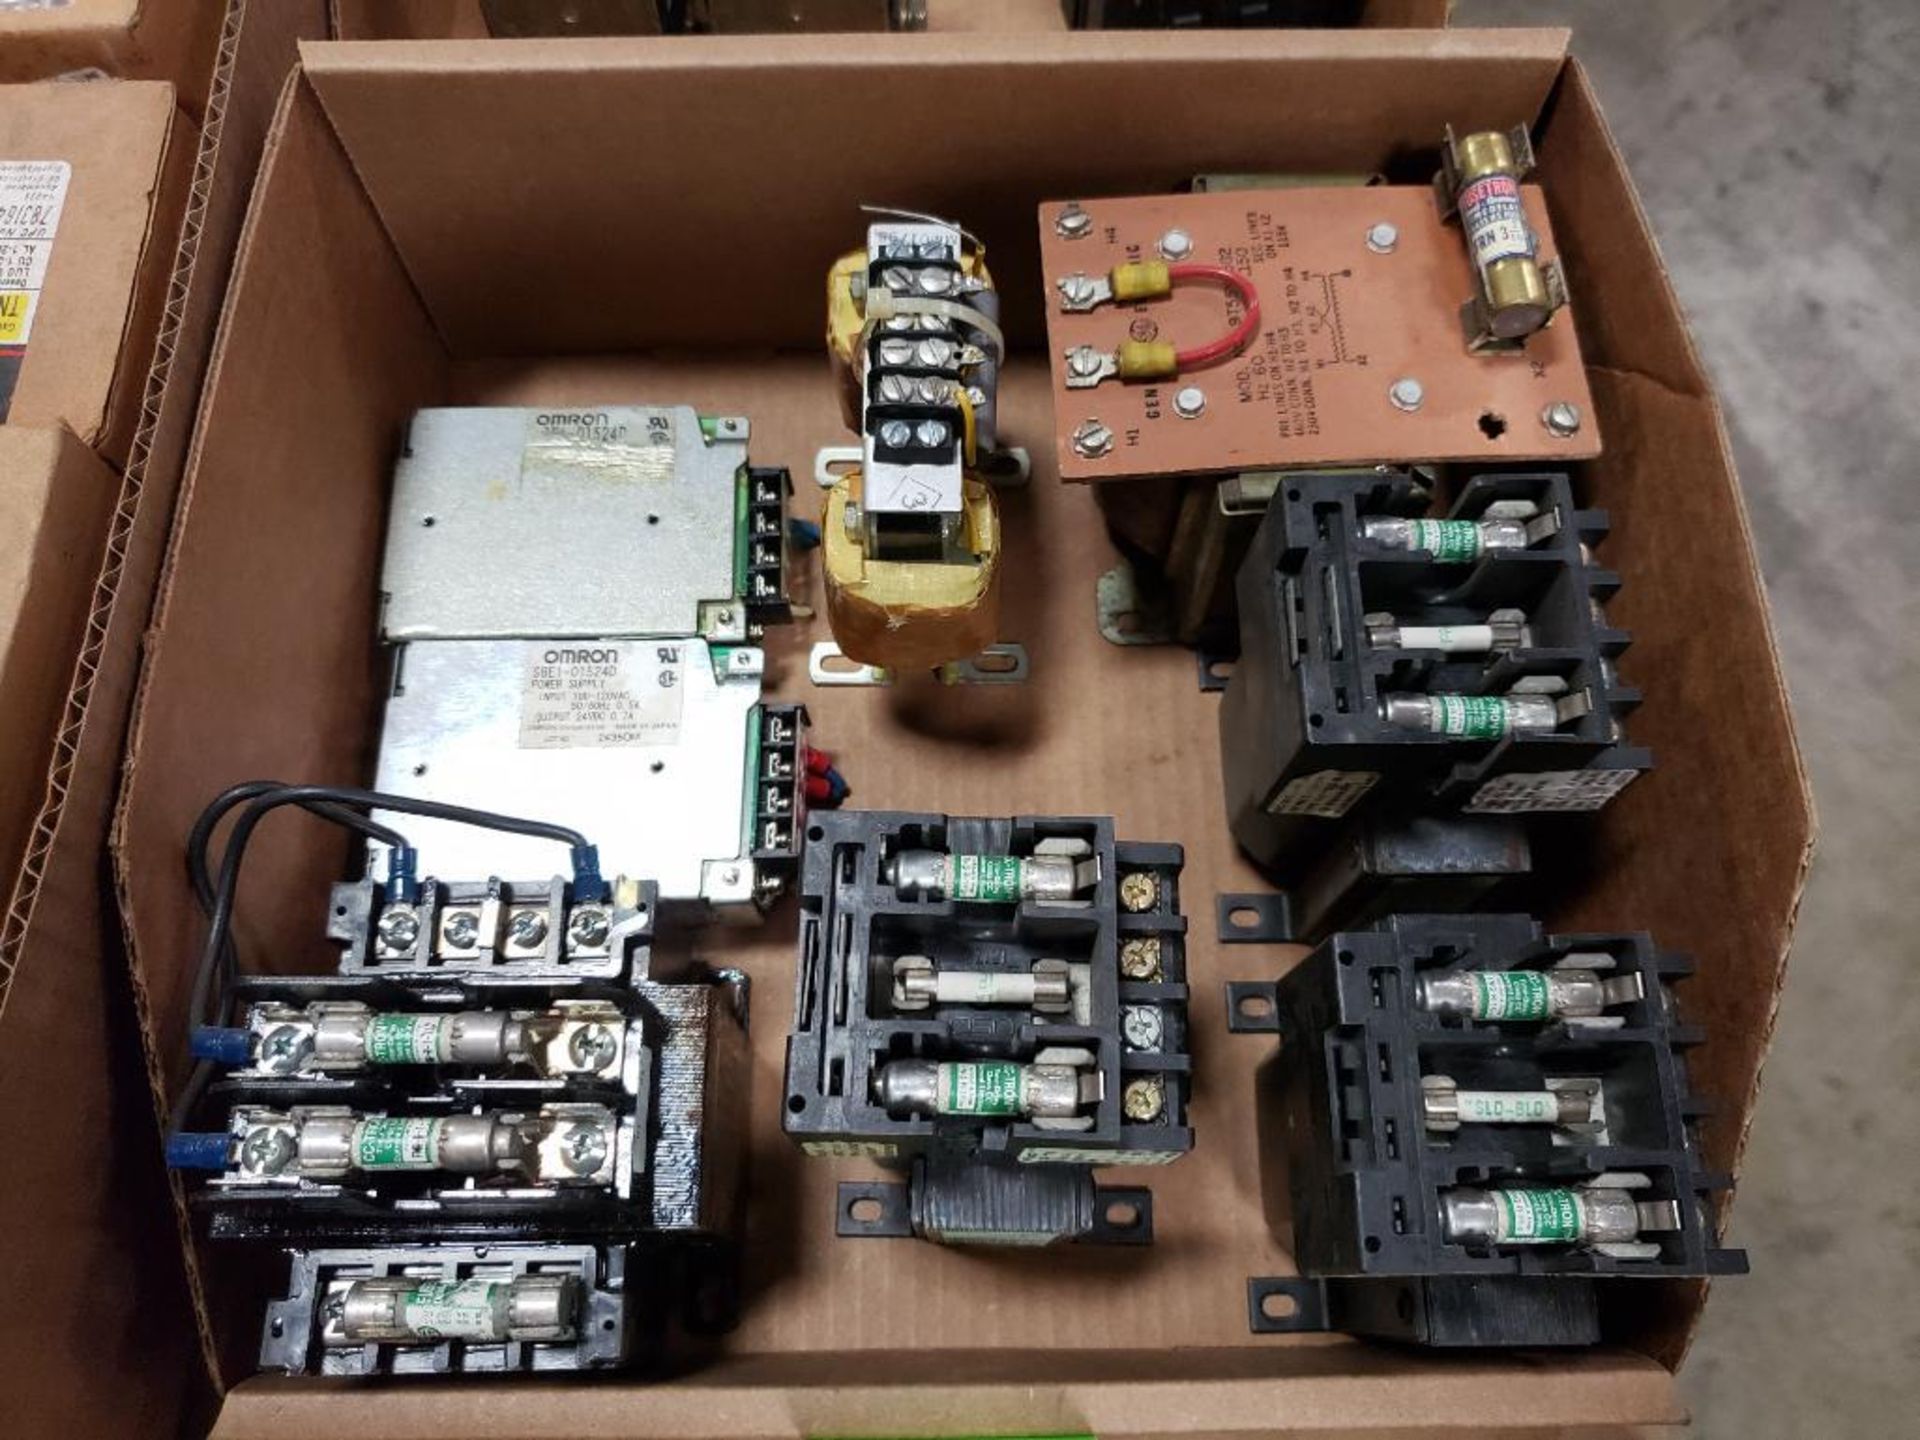 Assorted electrical transformer, power supply. Omron, Cutler Hammer.